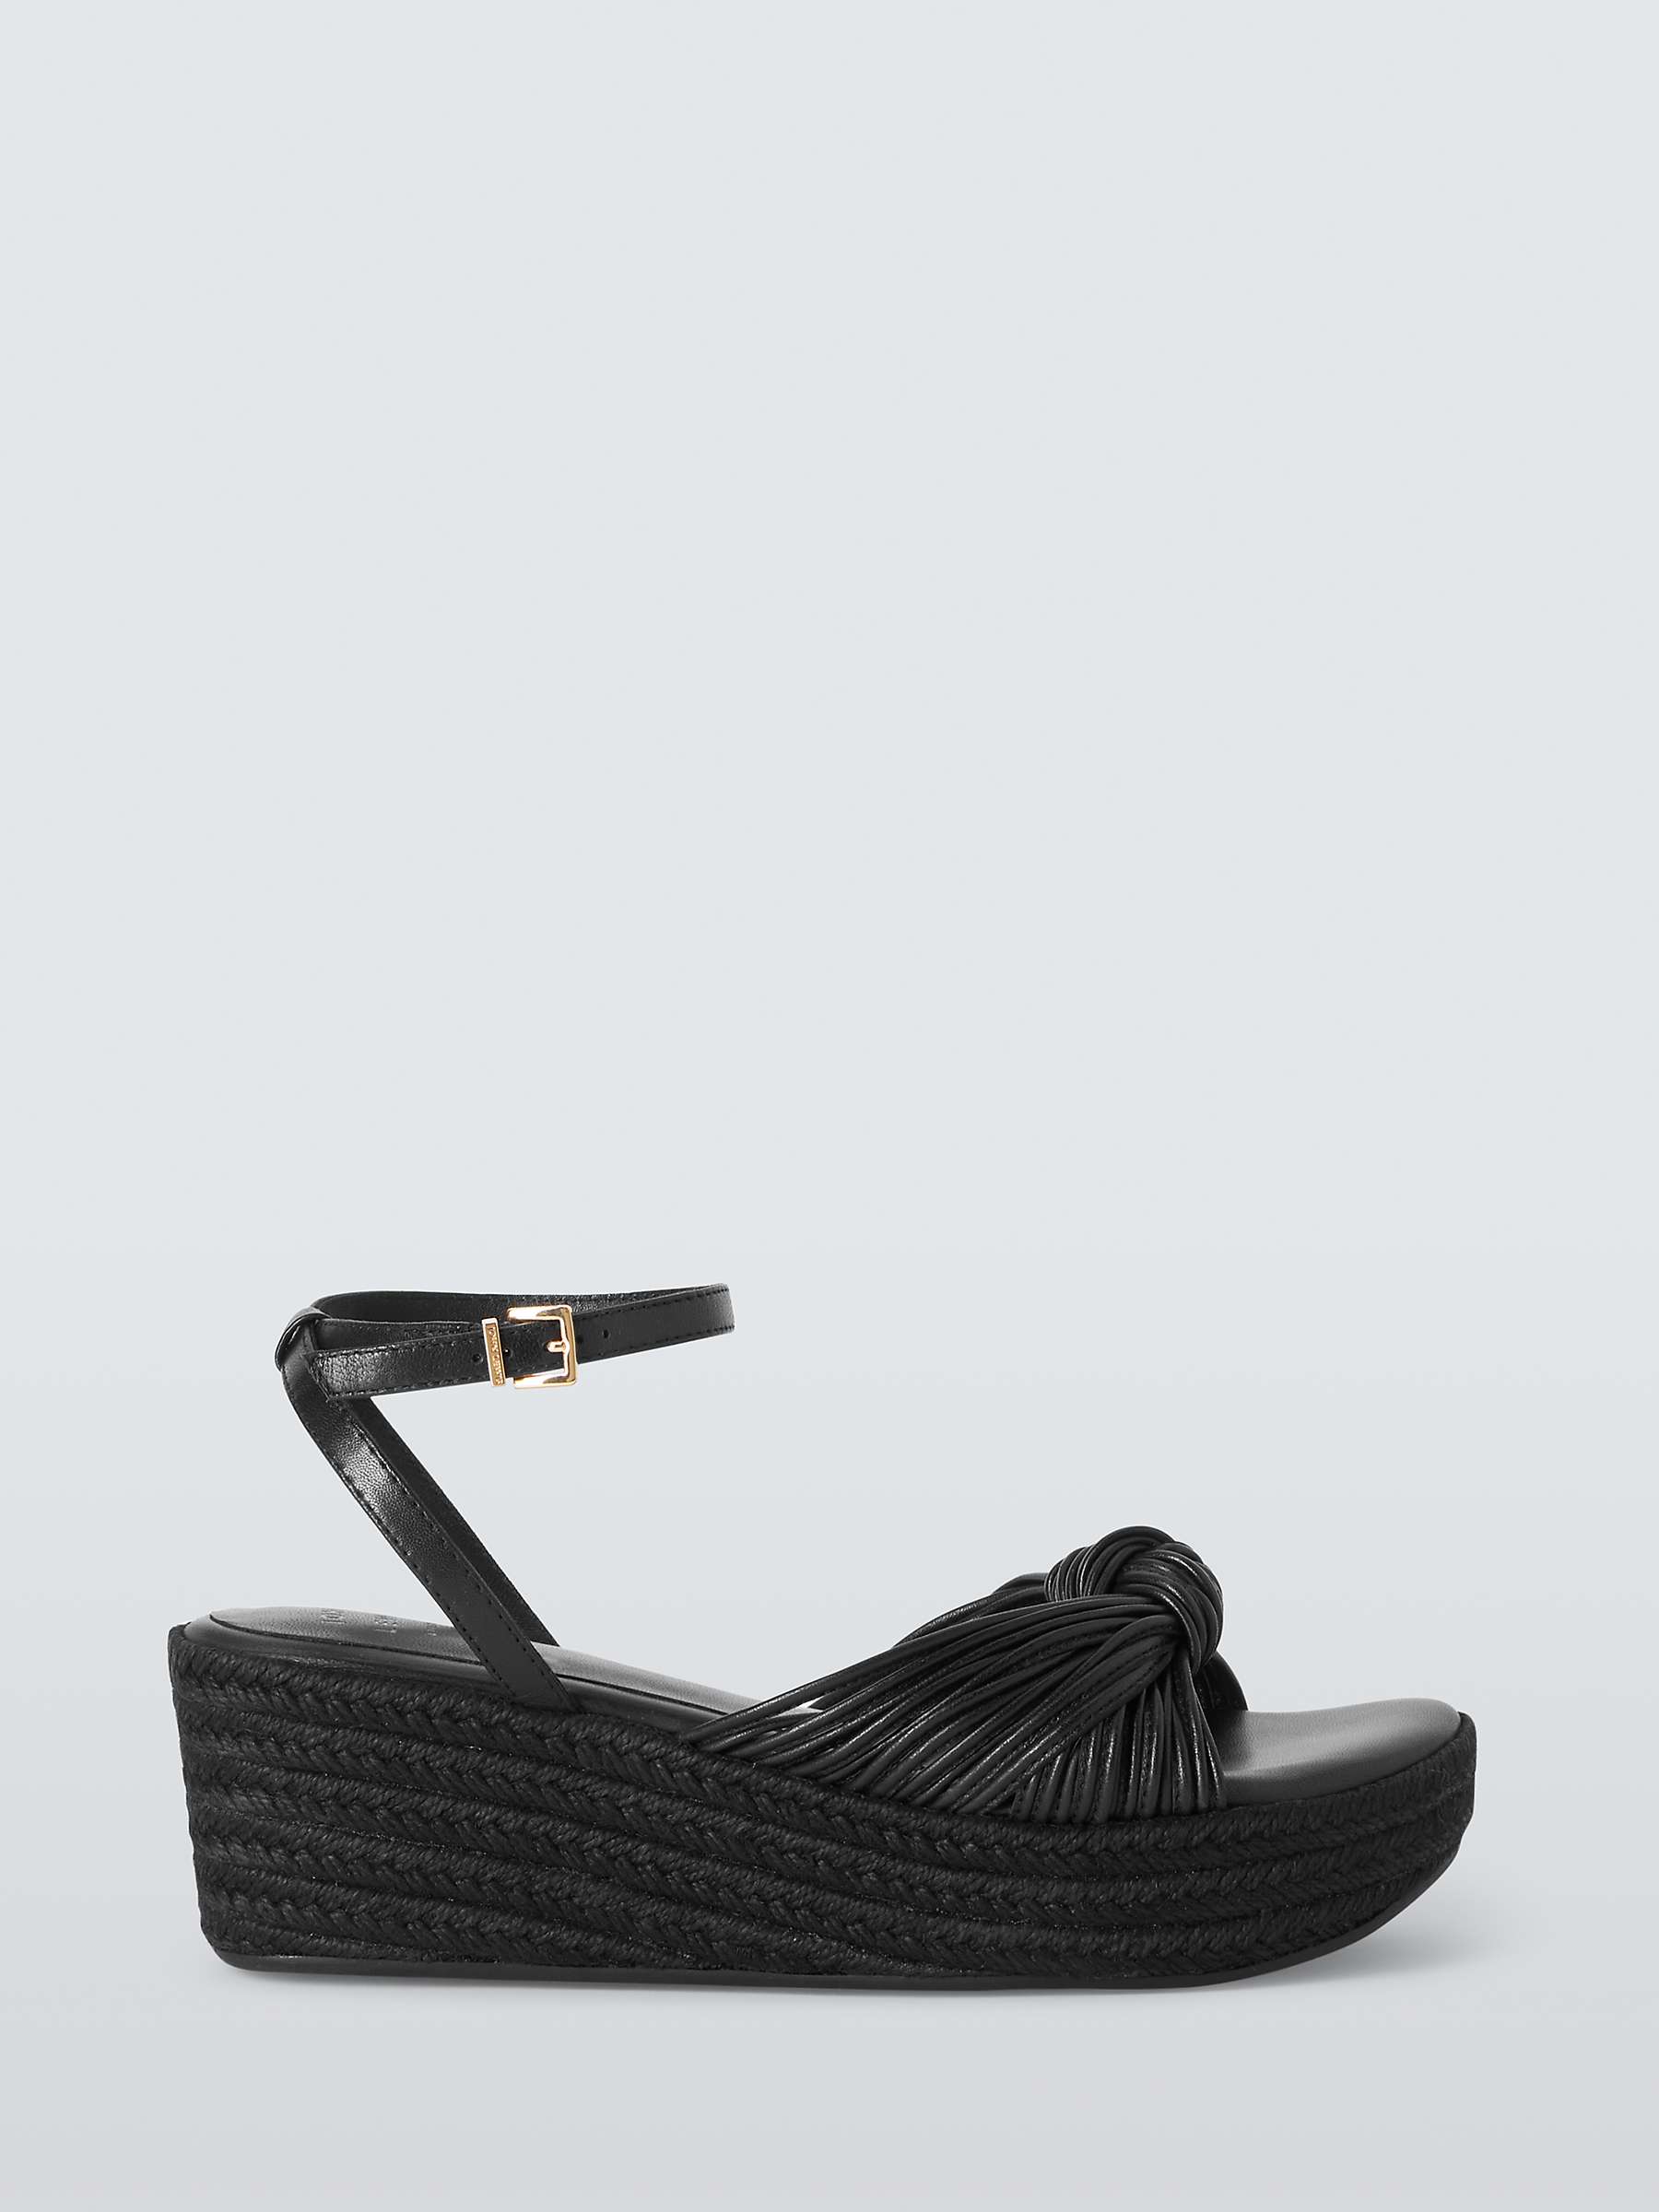 Buy John Lewis Kimi Leather Spaghetti Strap Knotted Wedge Sandals, Black Online at johnlewis.com